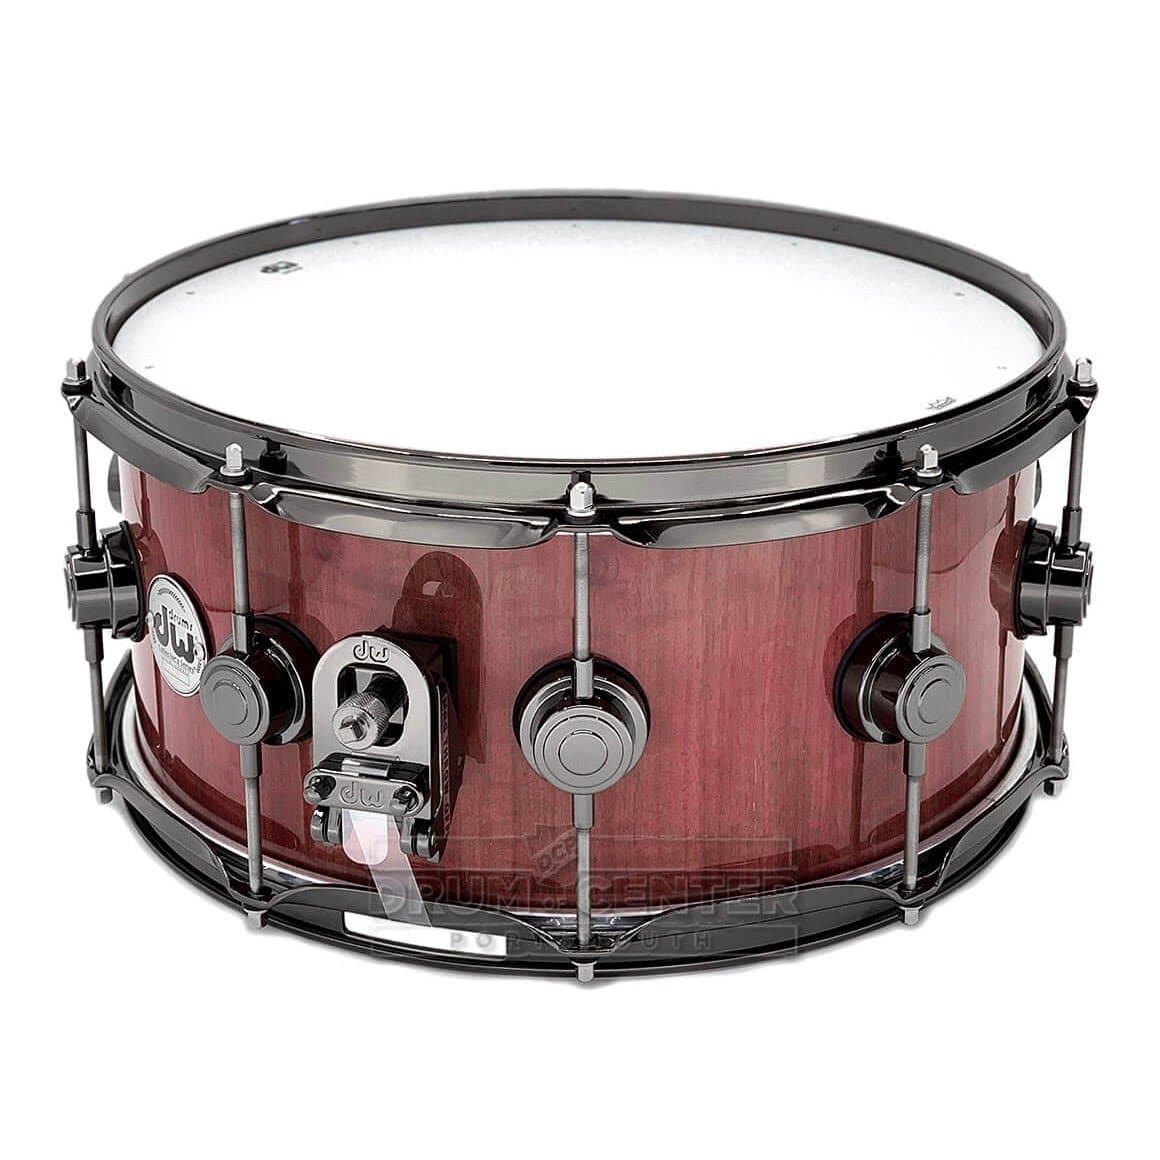 Canopus Drums Natural Oil Snare Drum 4x5.5